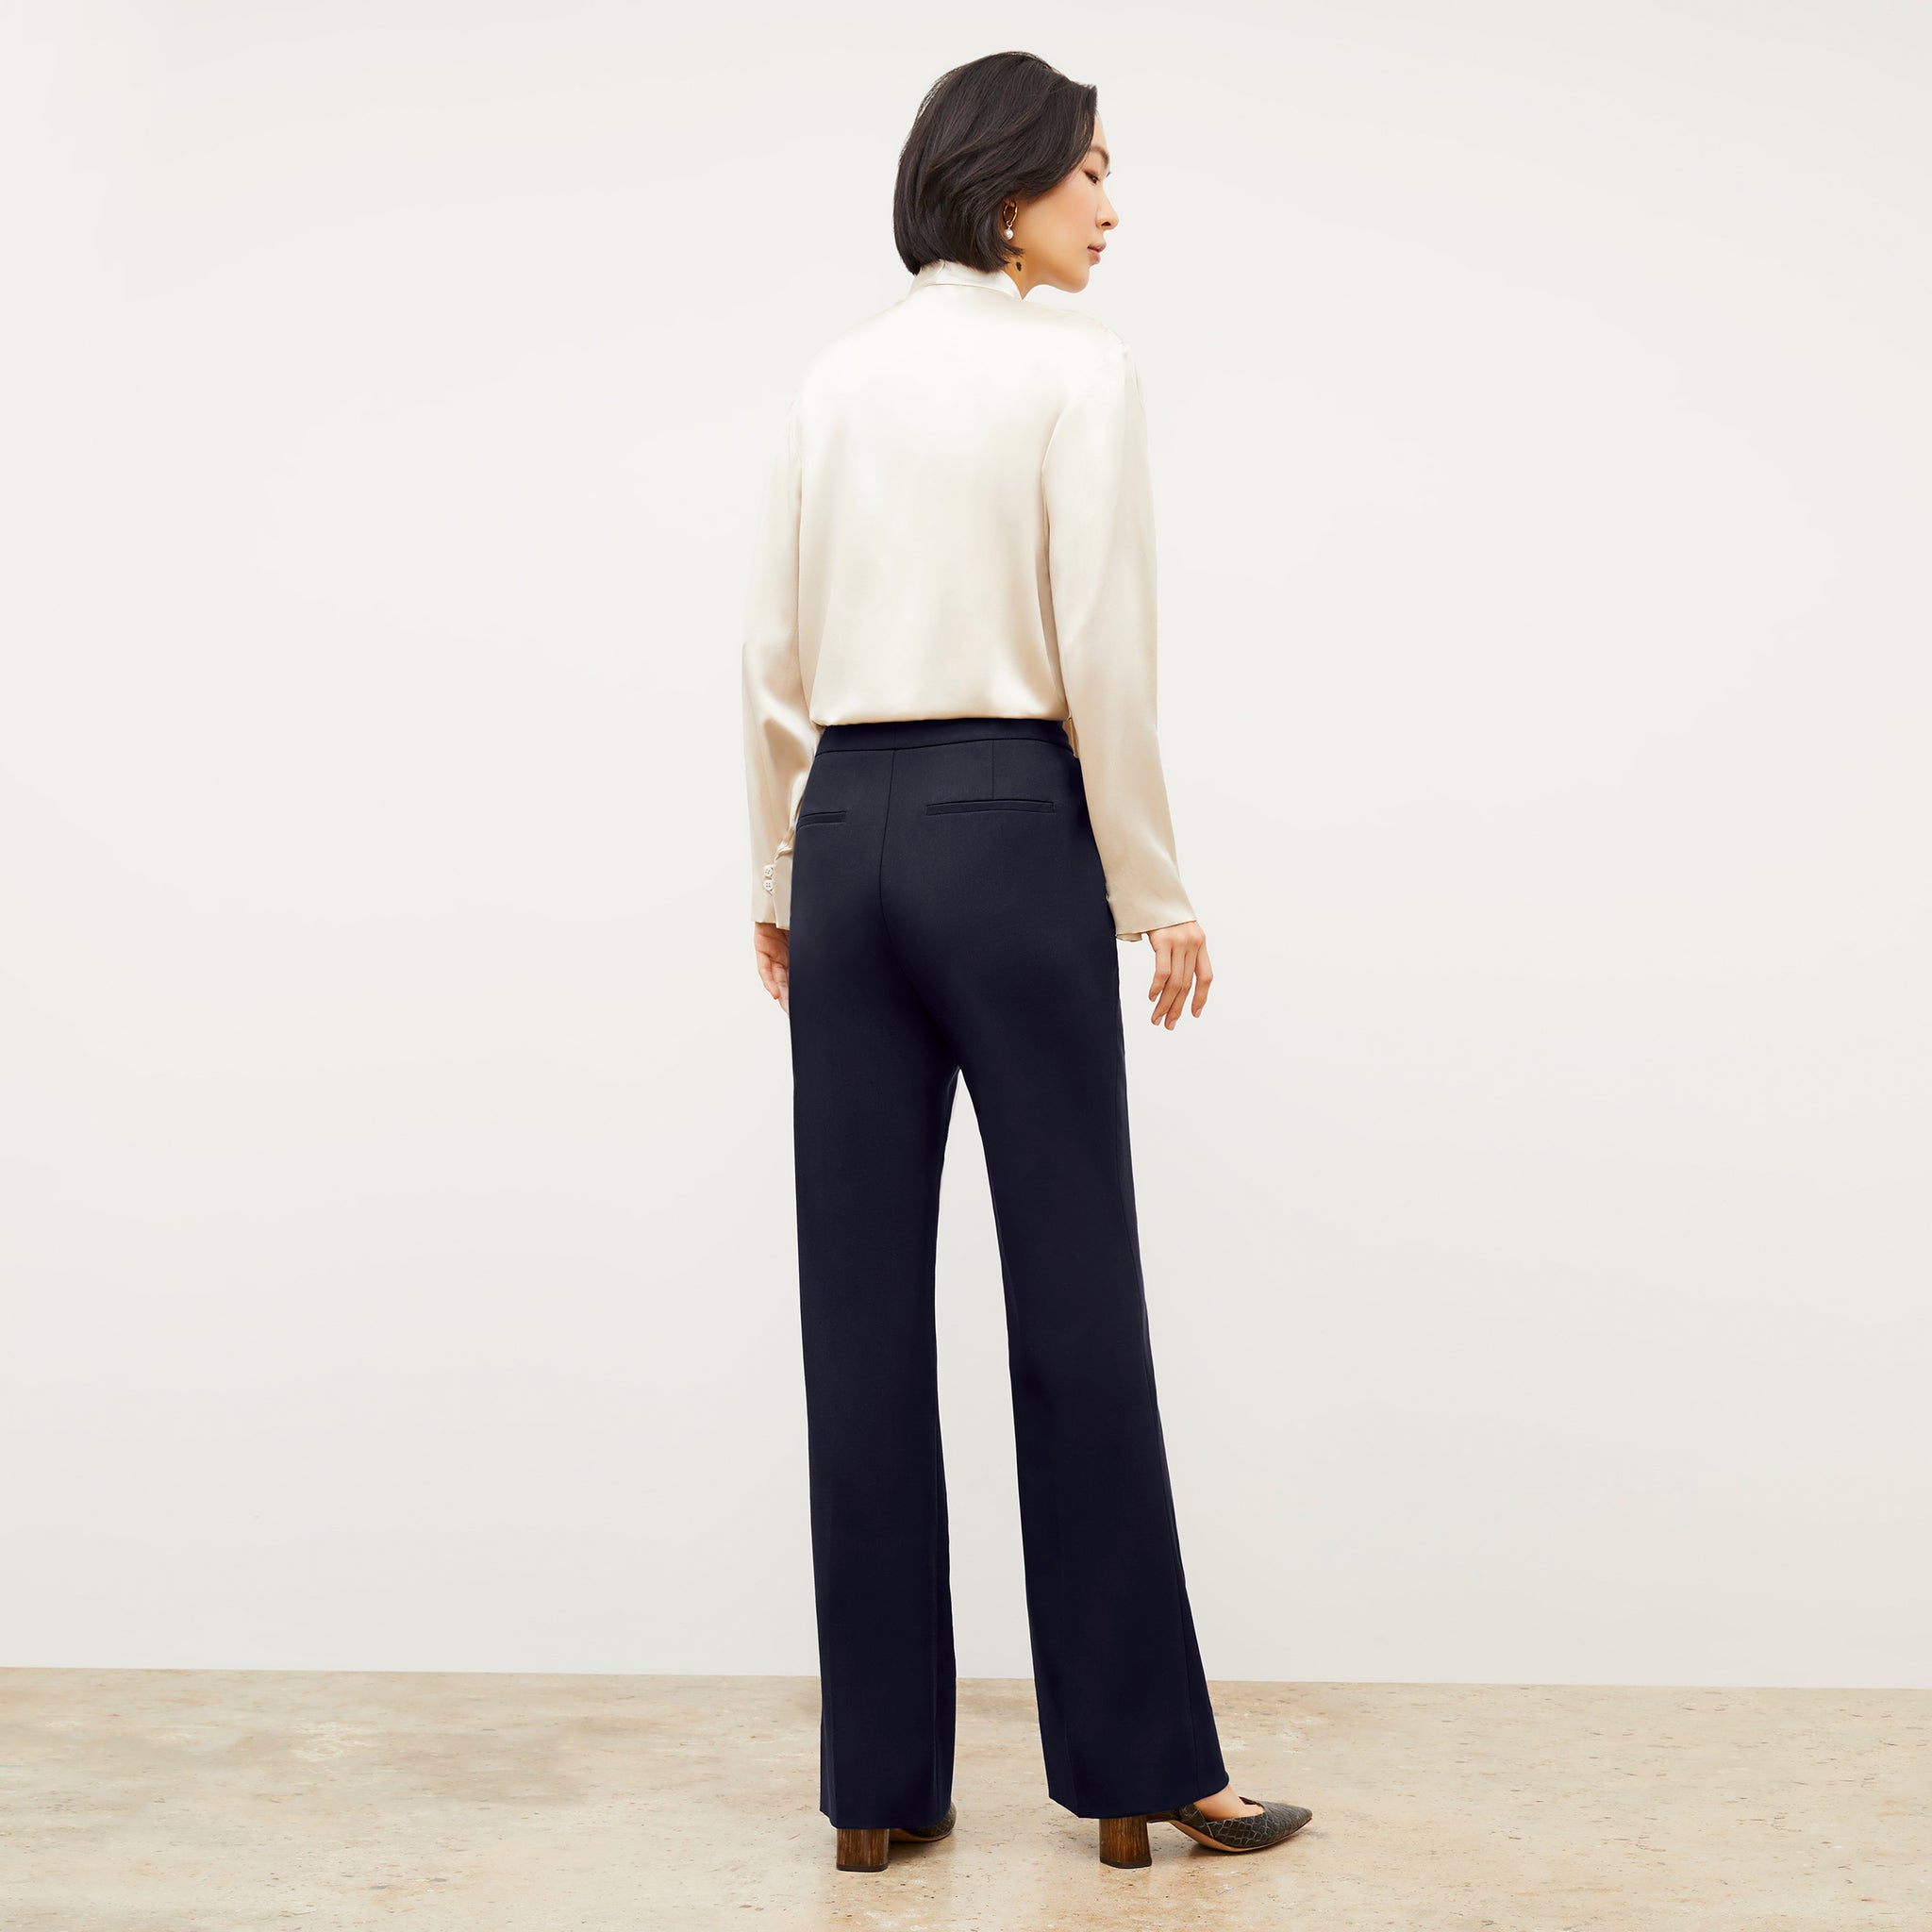 Back image of a woman wearing the Horton pant in Galaxy Blue